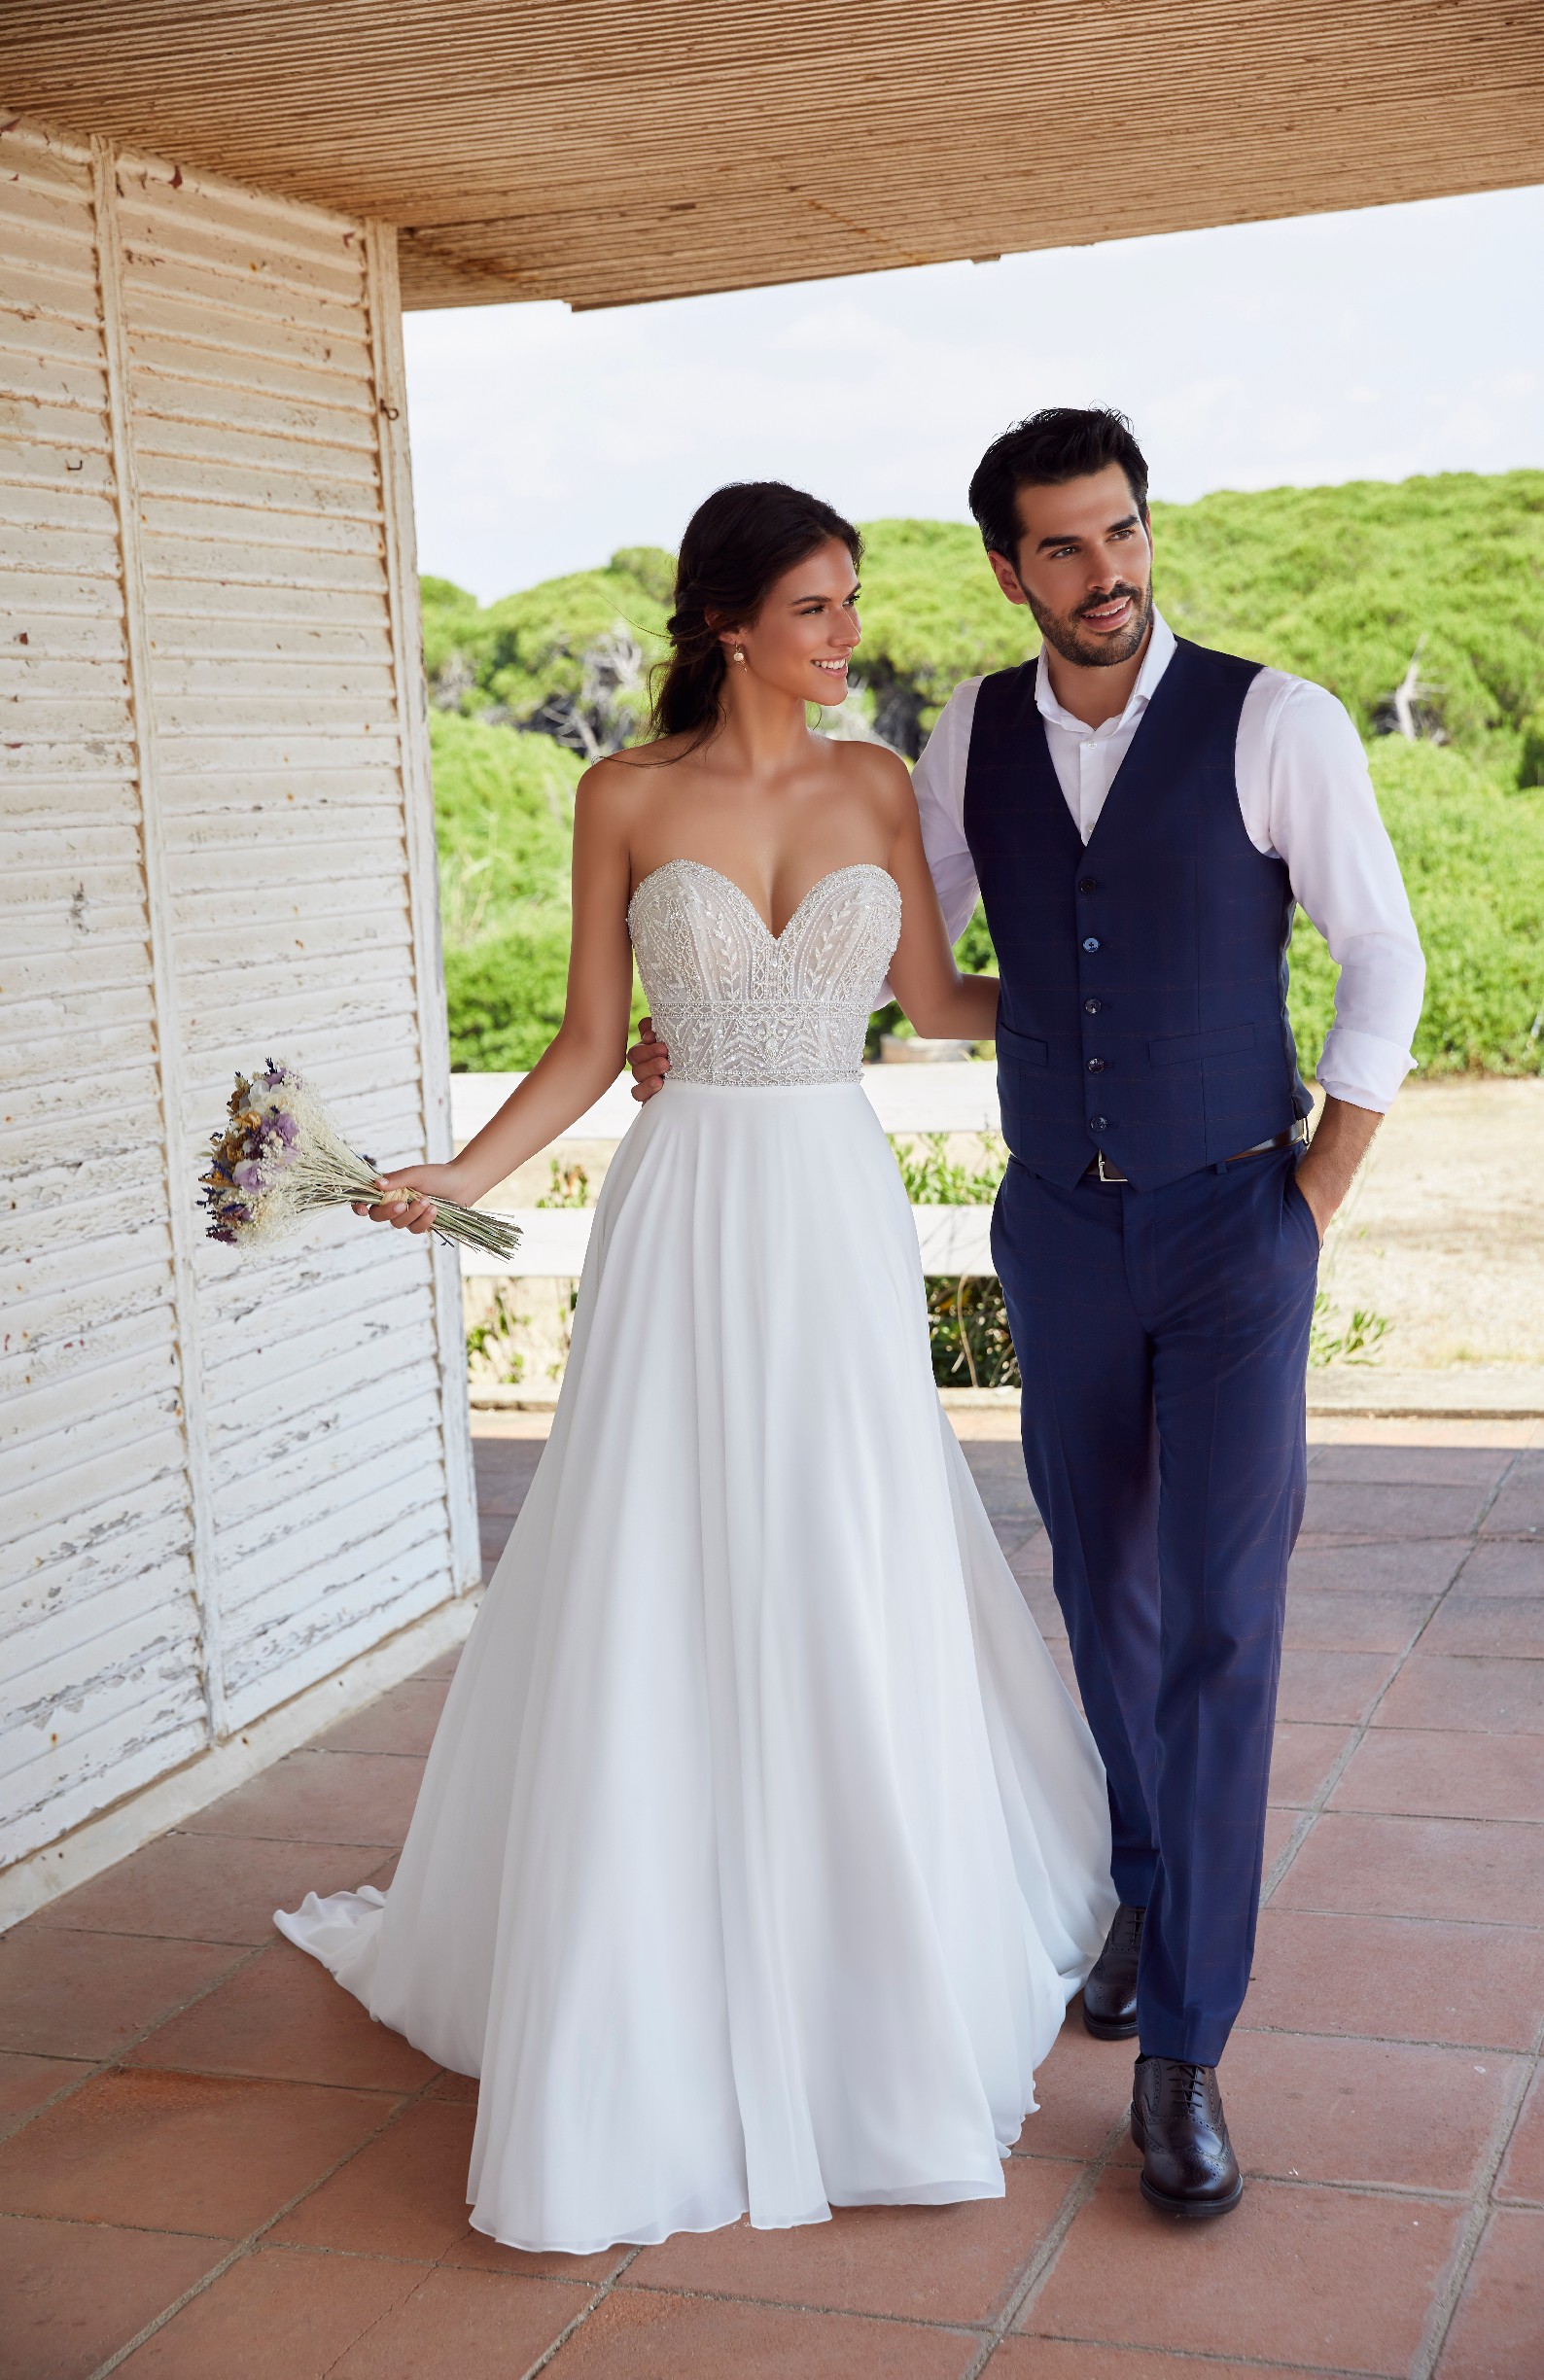 Bride and groom models stood on a terrace near greenery. Bride wears Ronald Joyce 18419, a strapless destination wedding dress with a beaded sweetheart bodice and plain skirt 